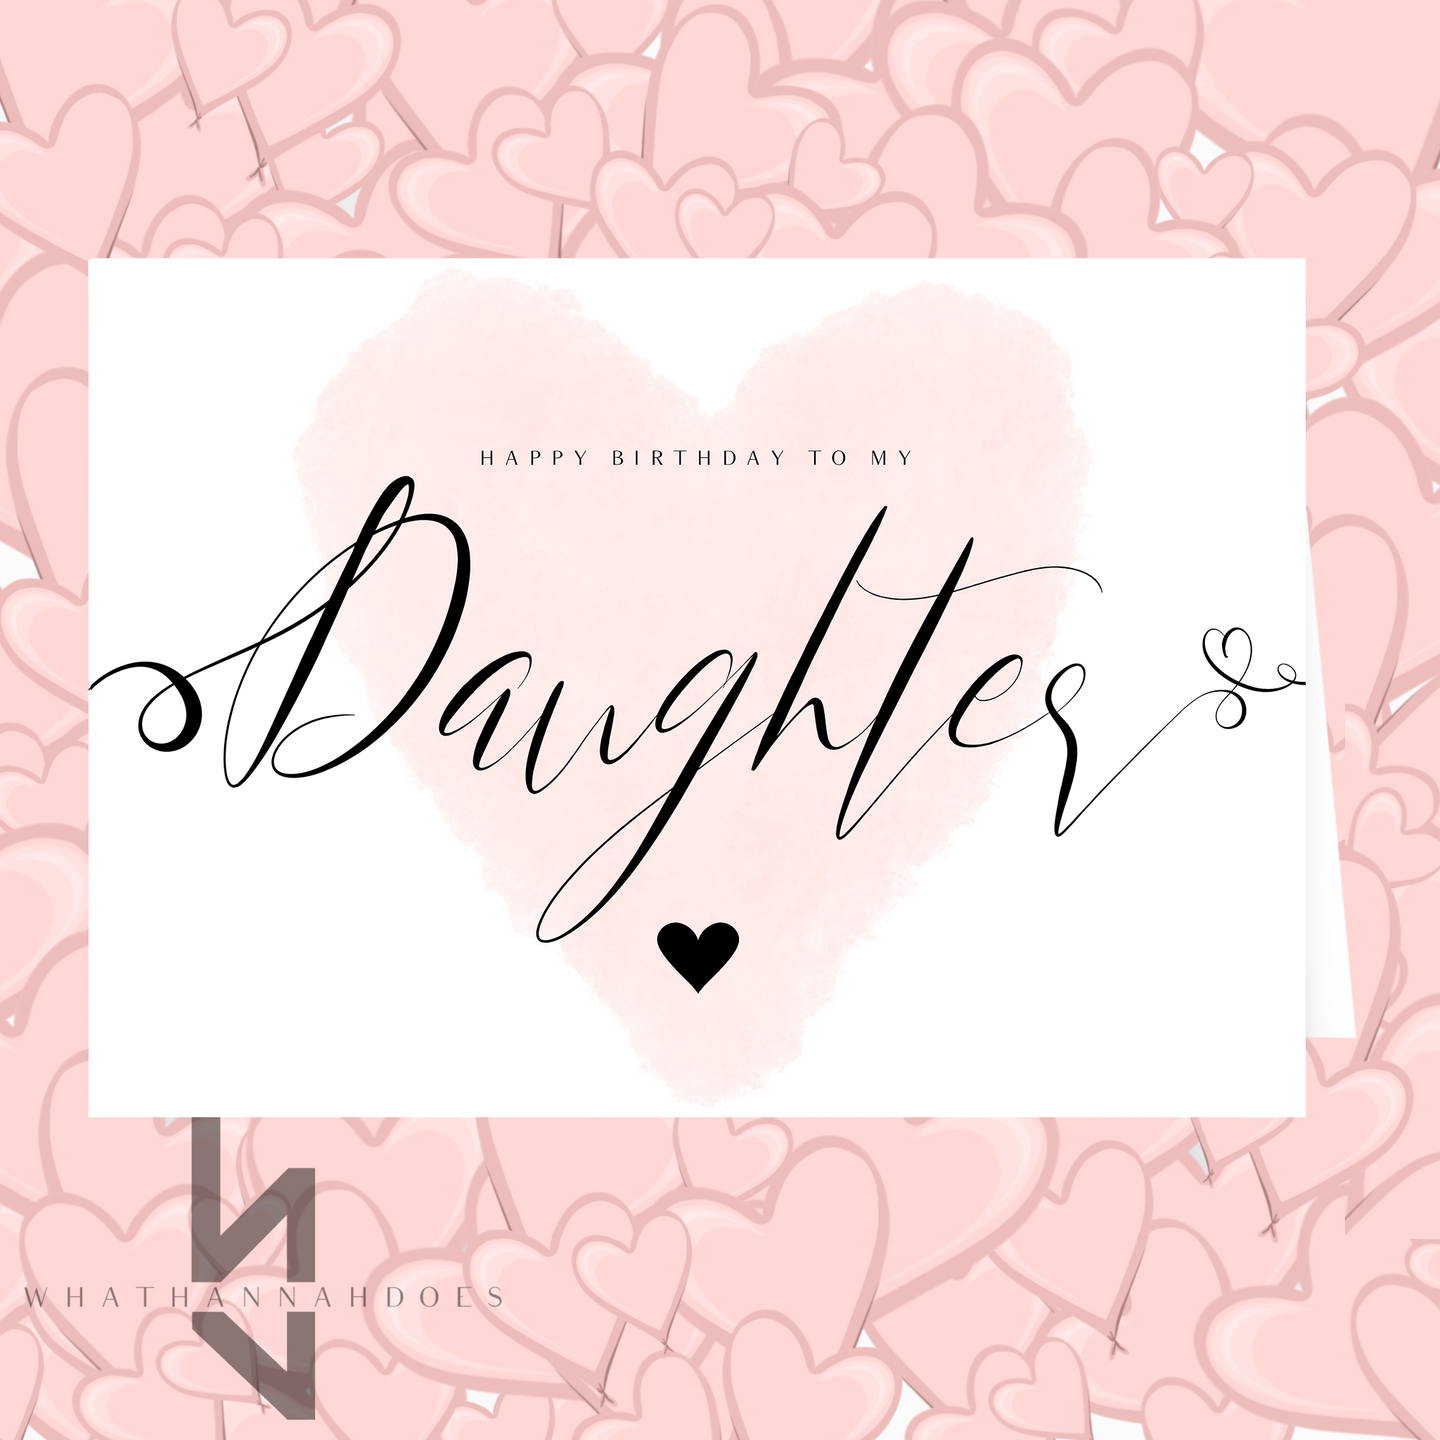 Happy Birthday Daughter A5 Card With Diamonte Heart